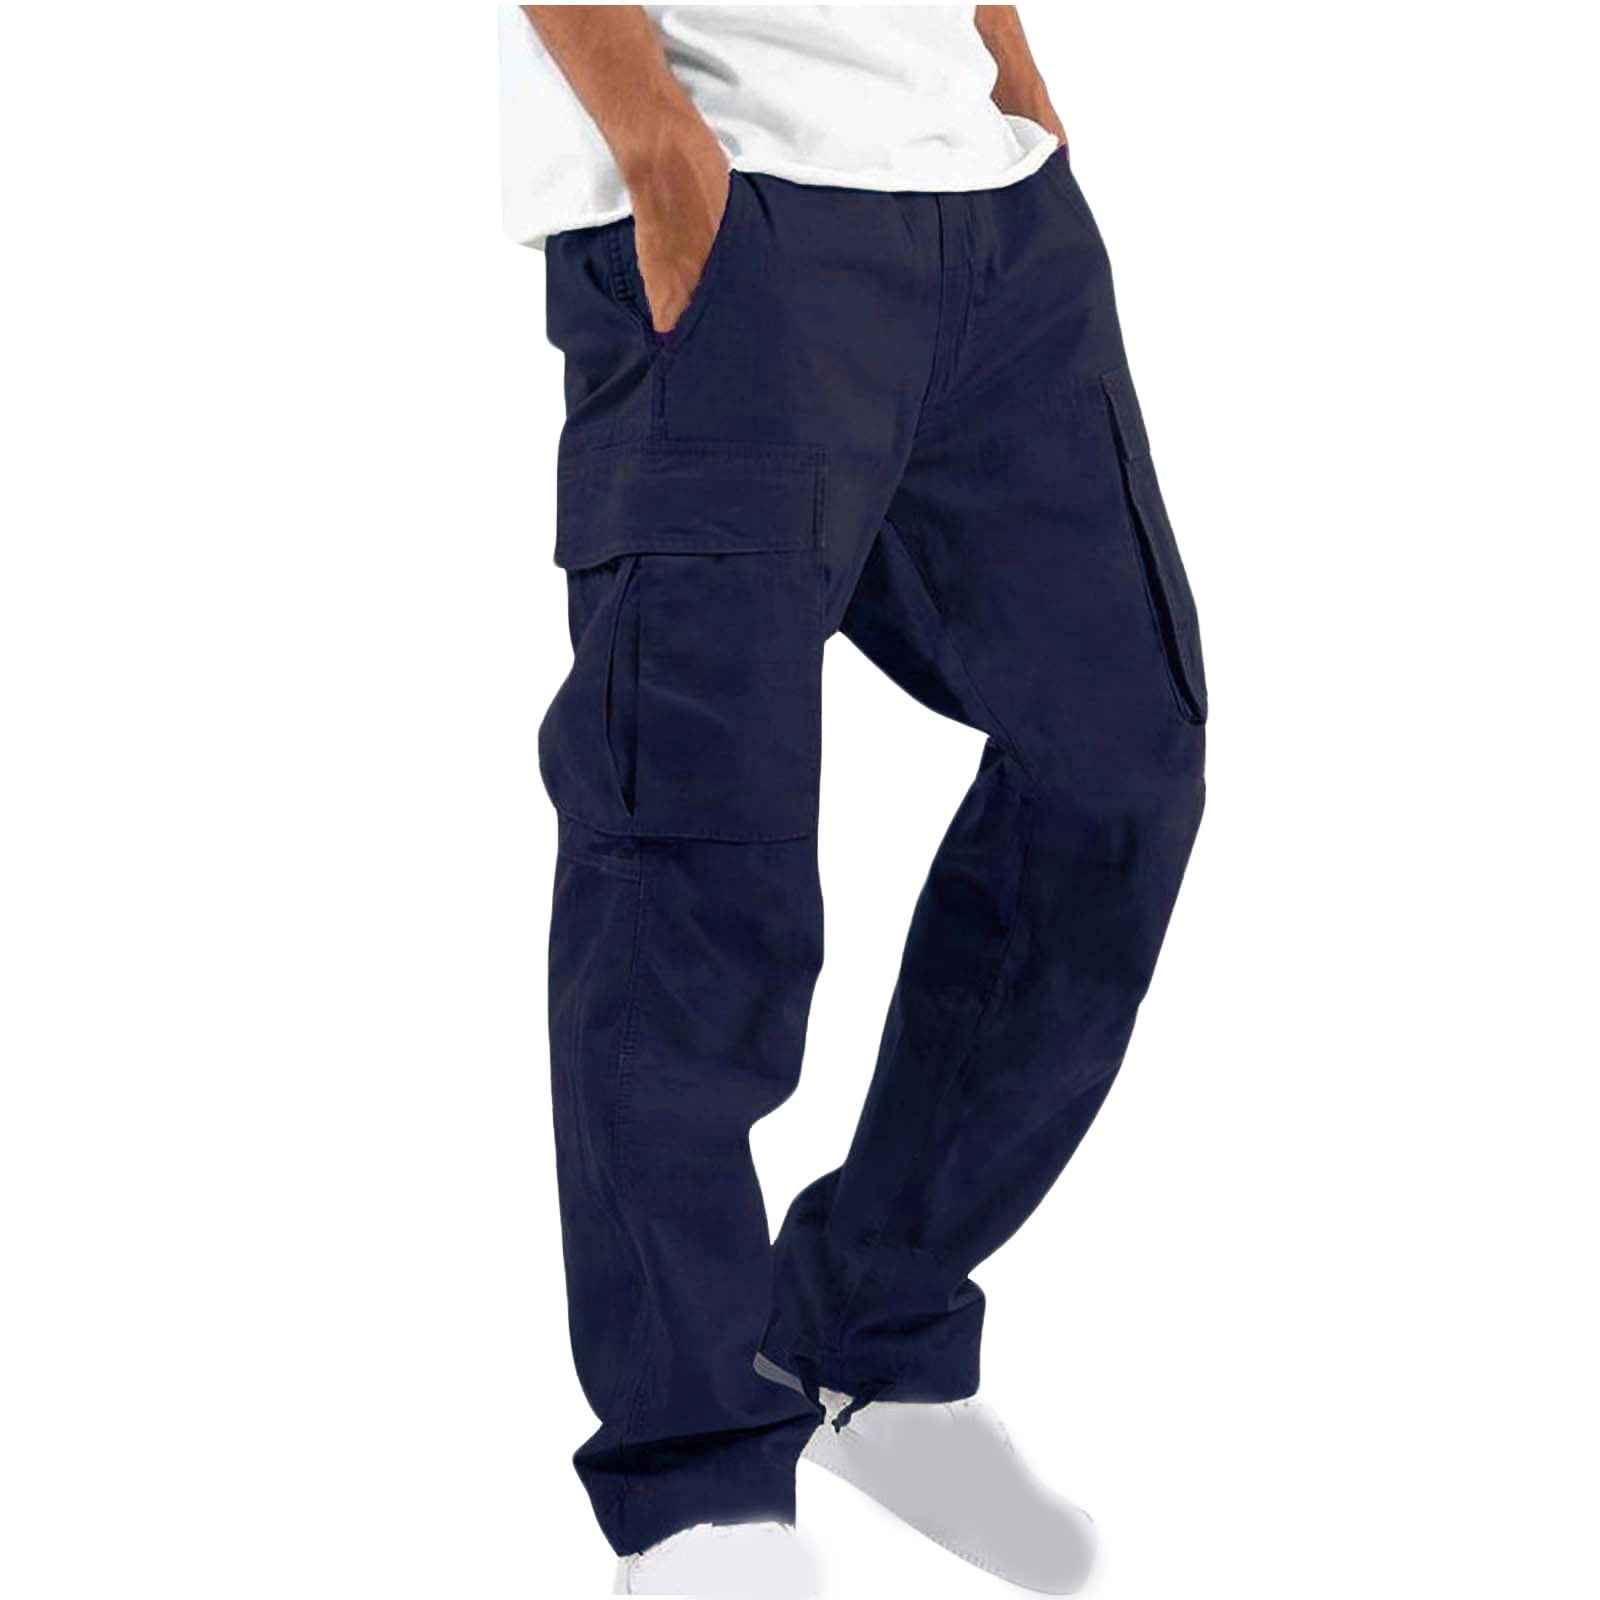 JURANMO Men's Relaxed Fit Cargo Pants Big and Tall Sizes Straight ...